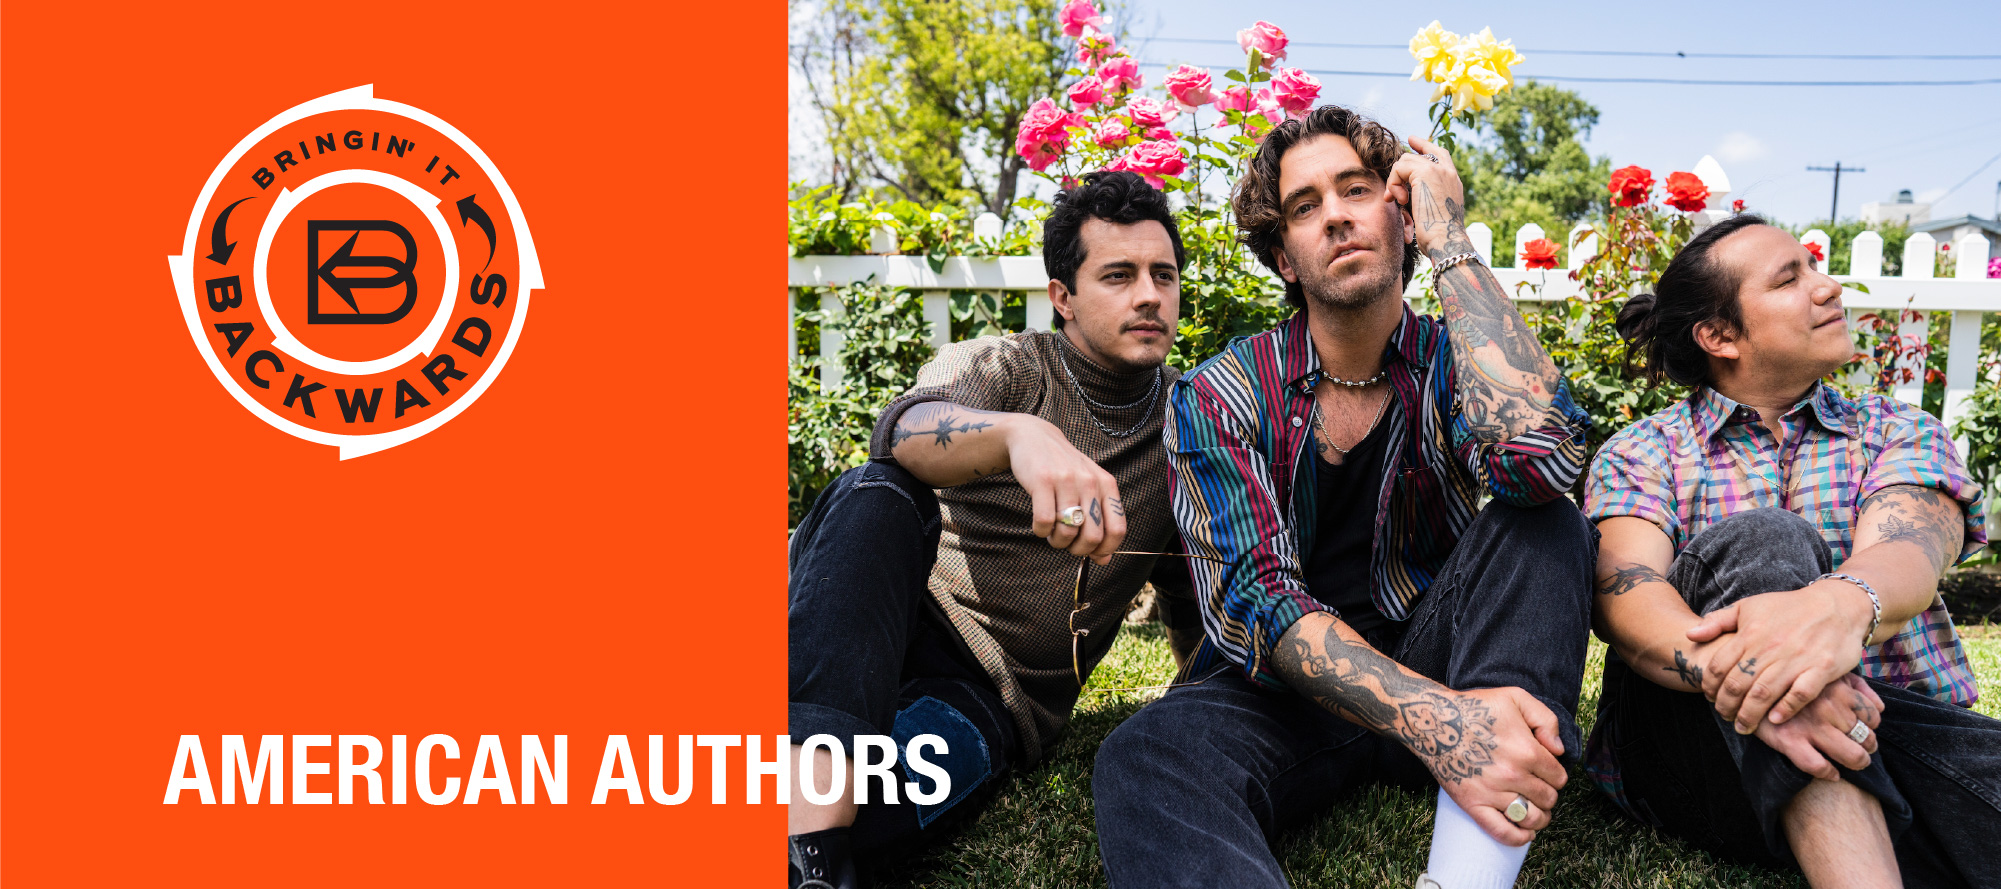 Bringin’ it Backwards: Interview with American Authors